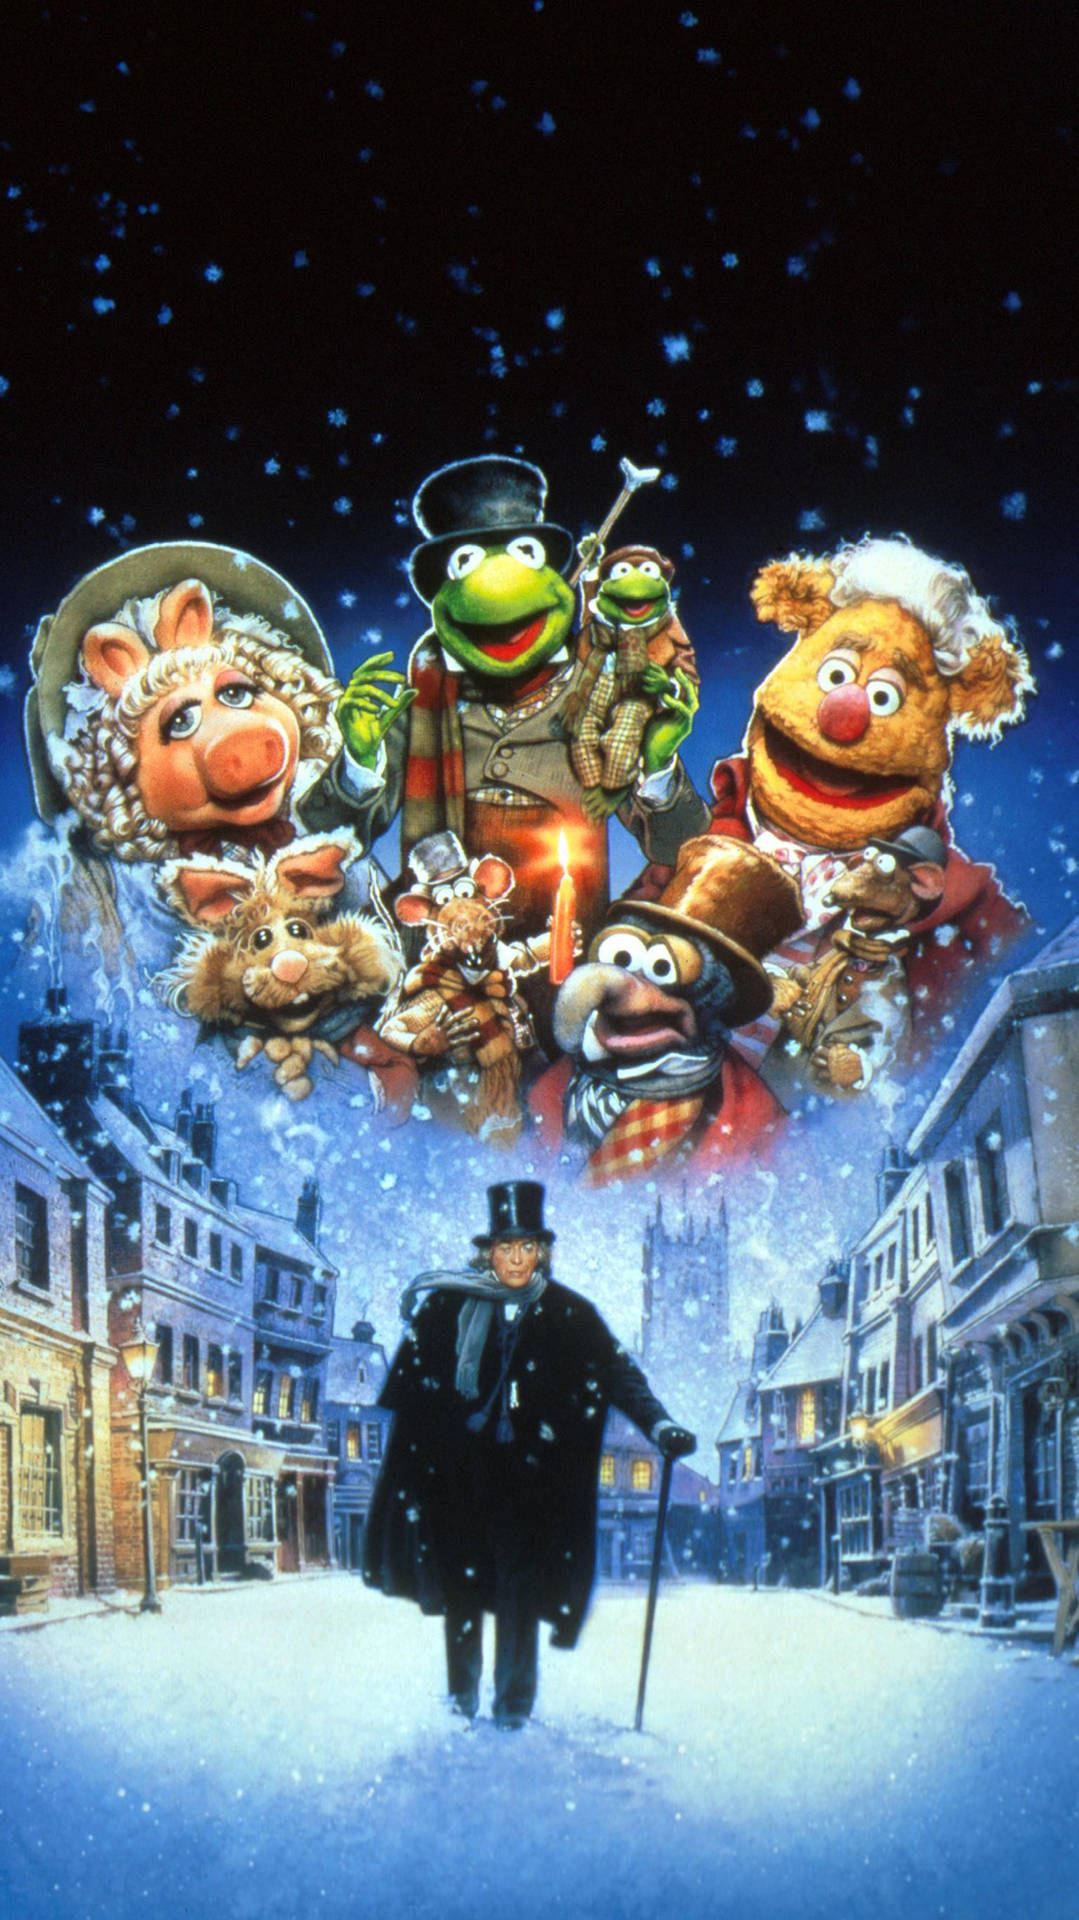 Scrooge in The Muppets: A Christmas Carol Wallpaper